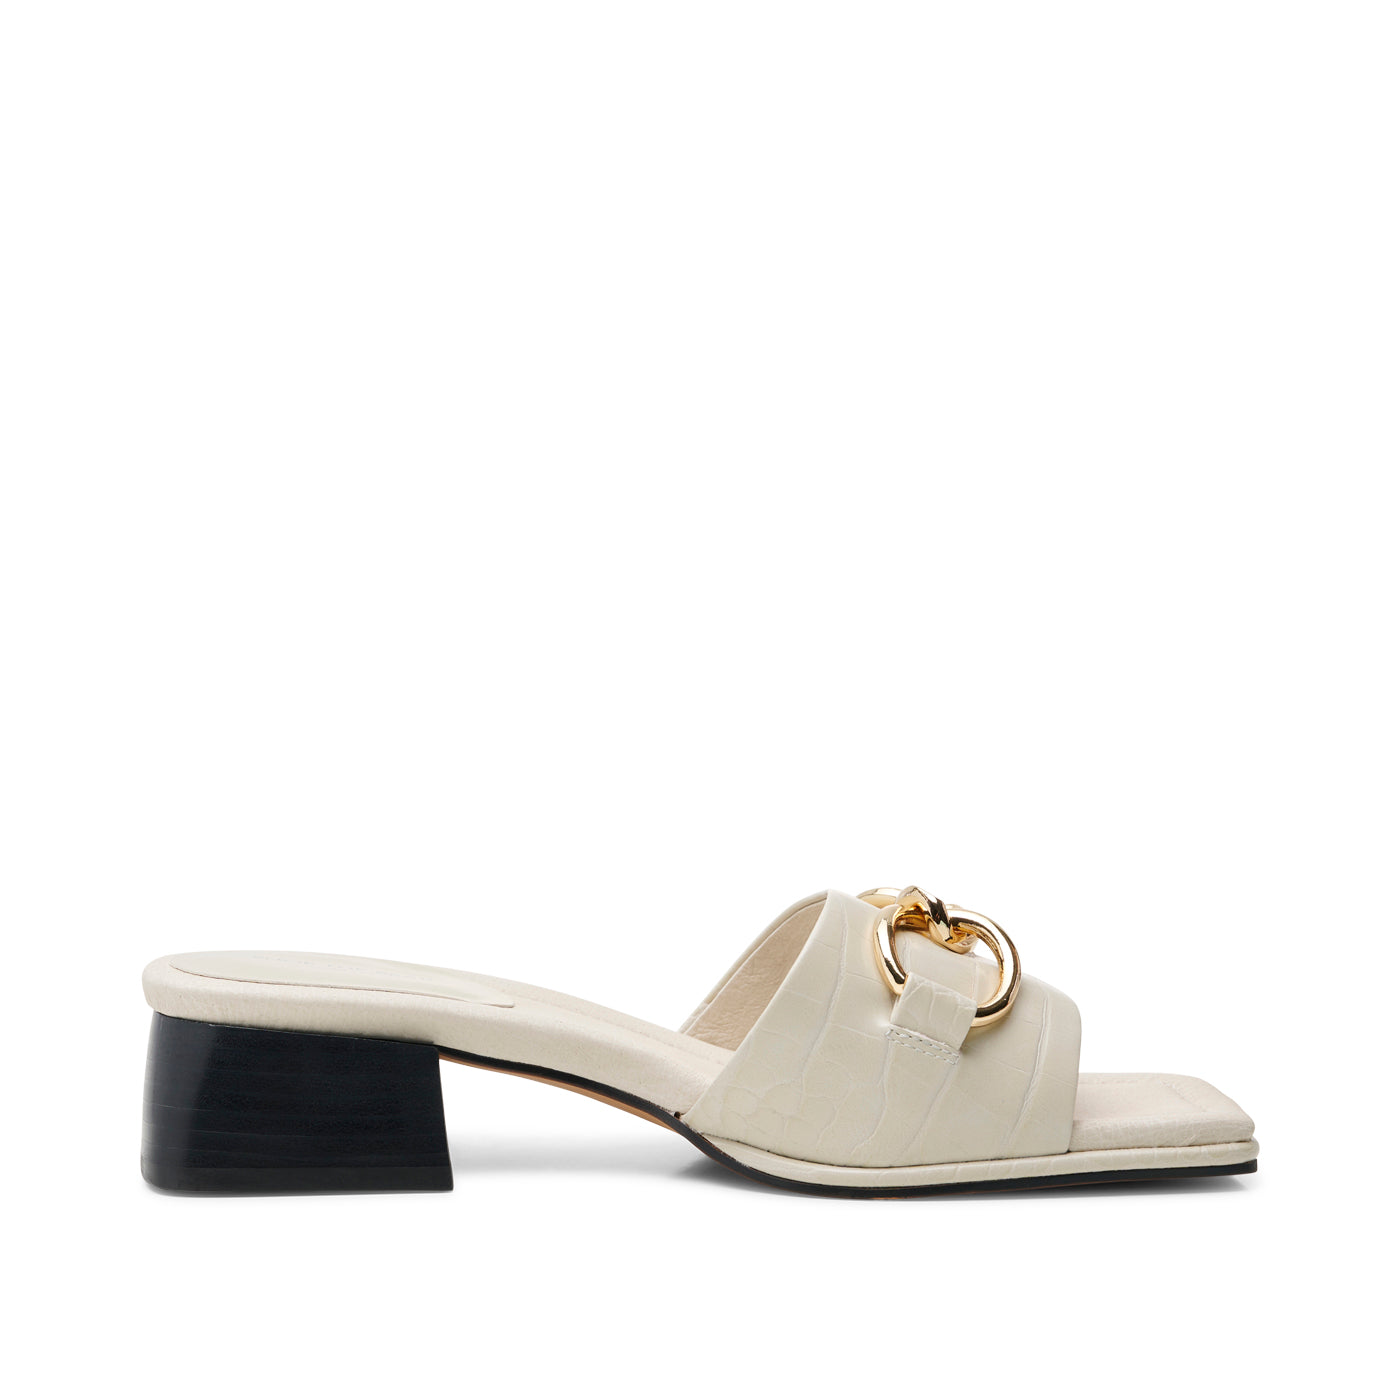 SHOE THE BEAR WOMENS Colette mule leather Sandals 127 OFF WHITE